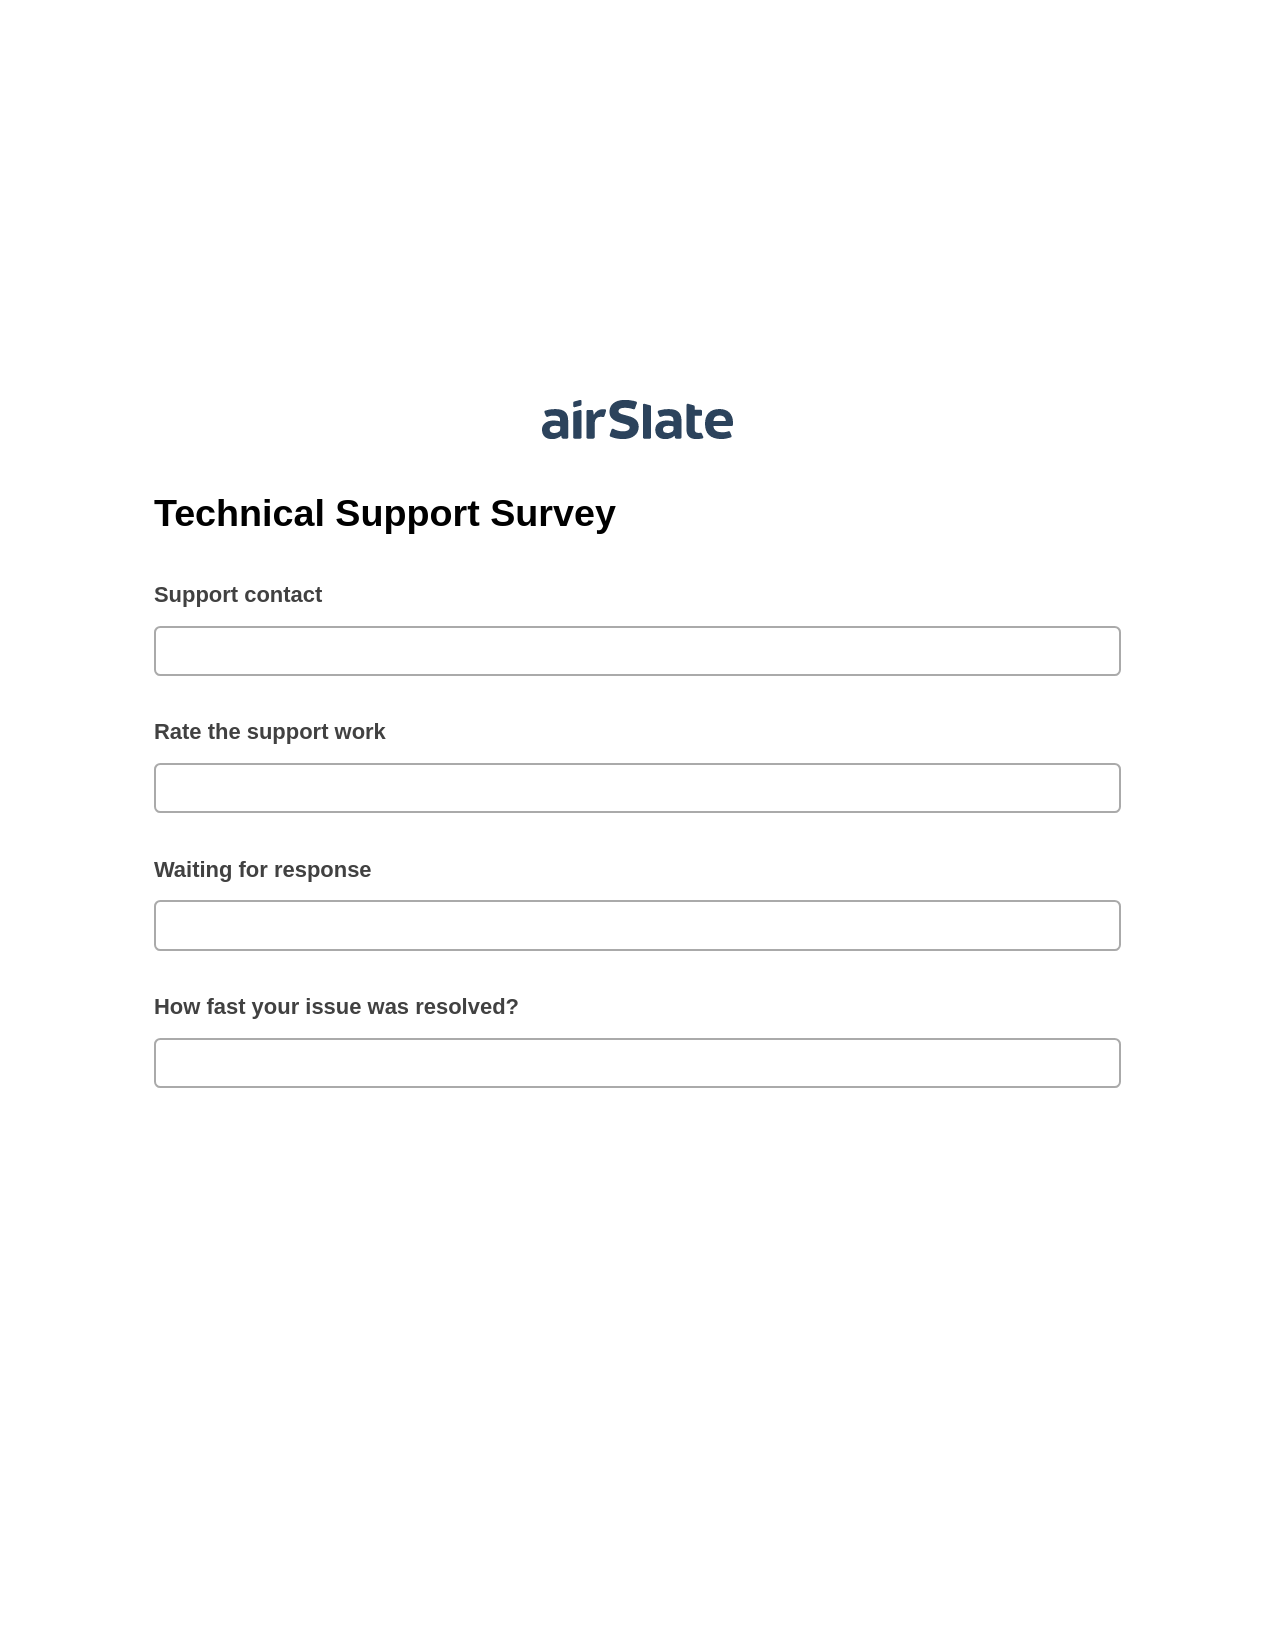 Multirole Technical Support Survey Pre-fill from Google Sheets Bot, Remove Tags From Slate Bot, Export to WebMerge Bot